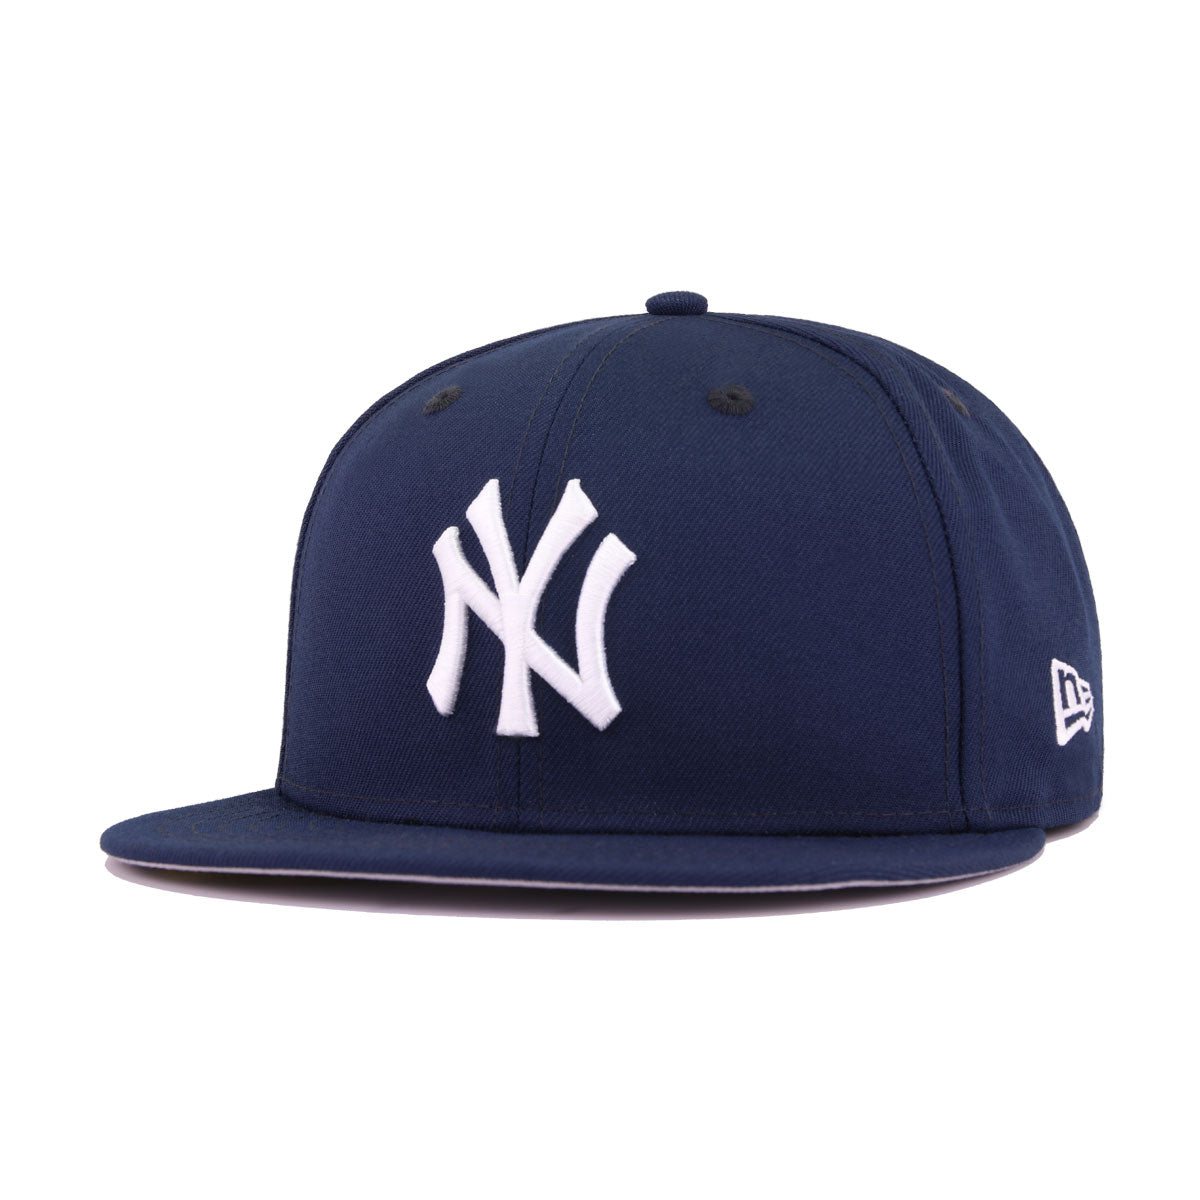 blue fitted hat with patch